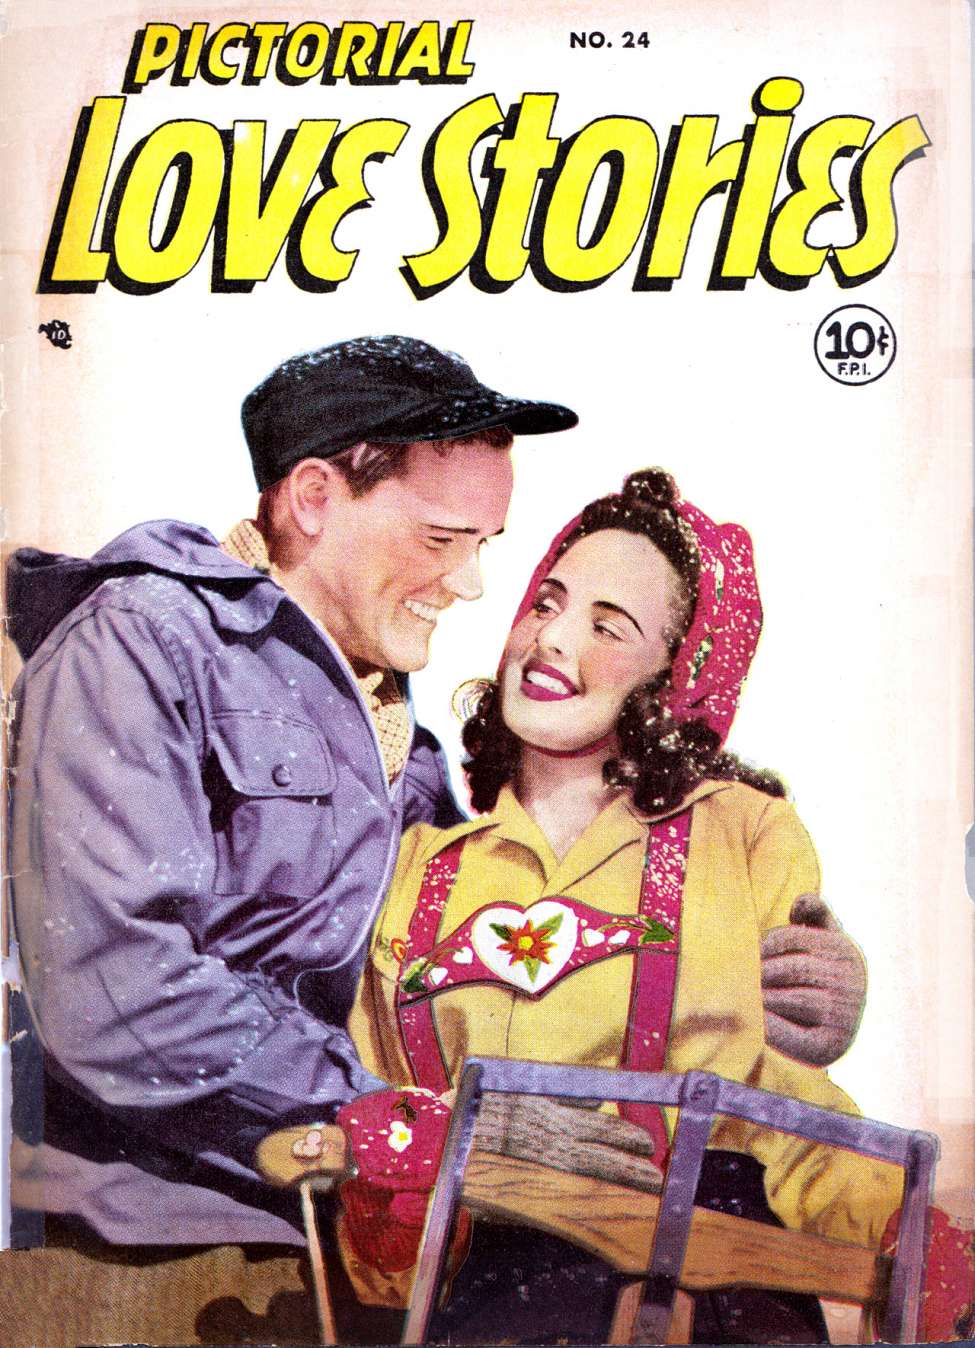 Book Cover For Pictorial Love Stories 24 - Version 1